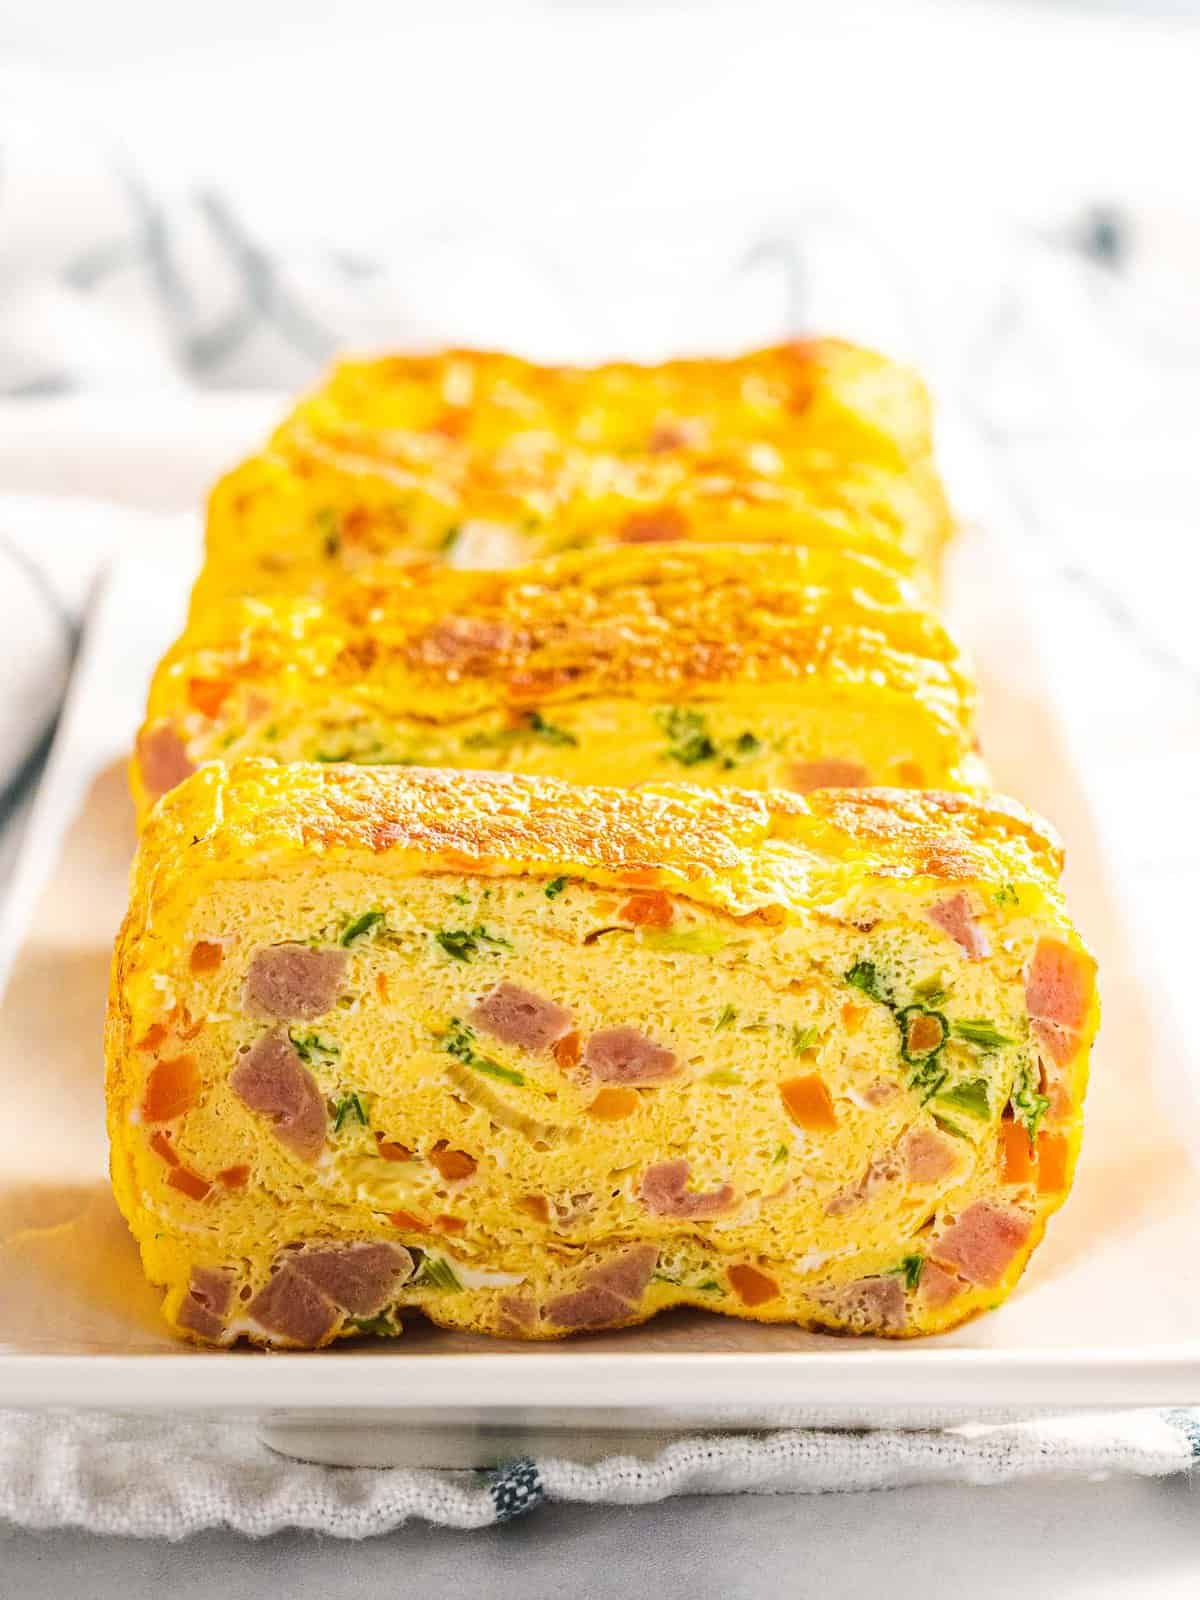 Korean rolled omelet with ham, carrots, and green onions.